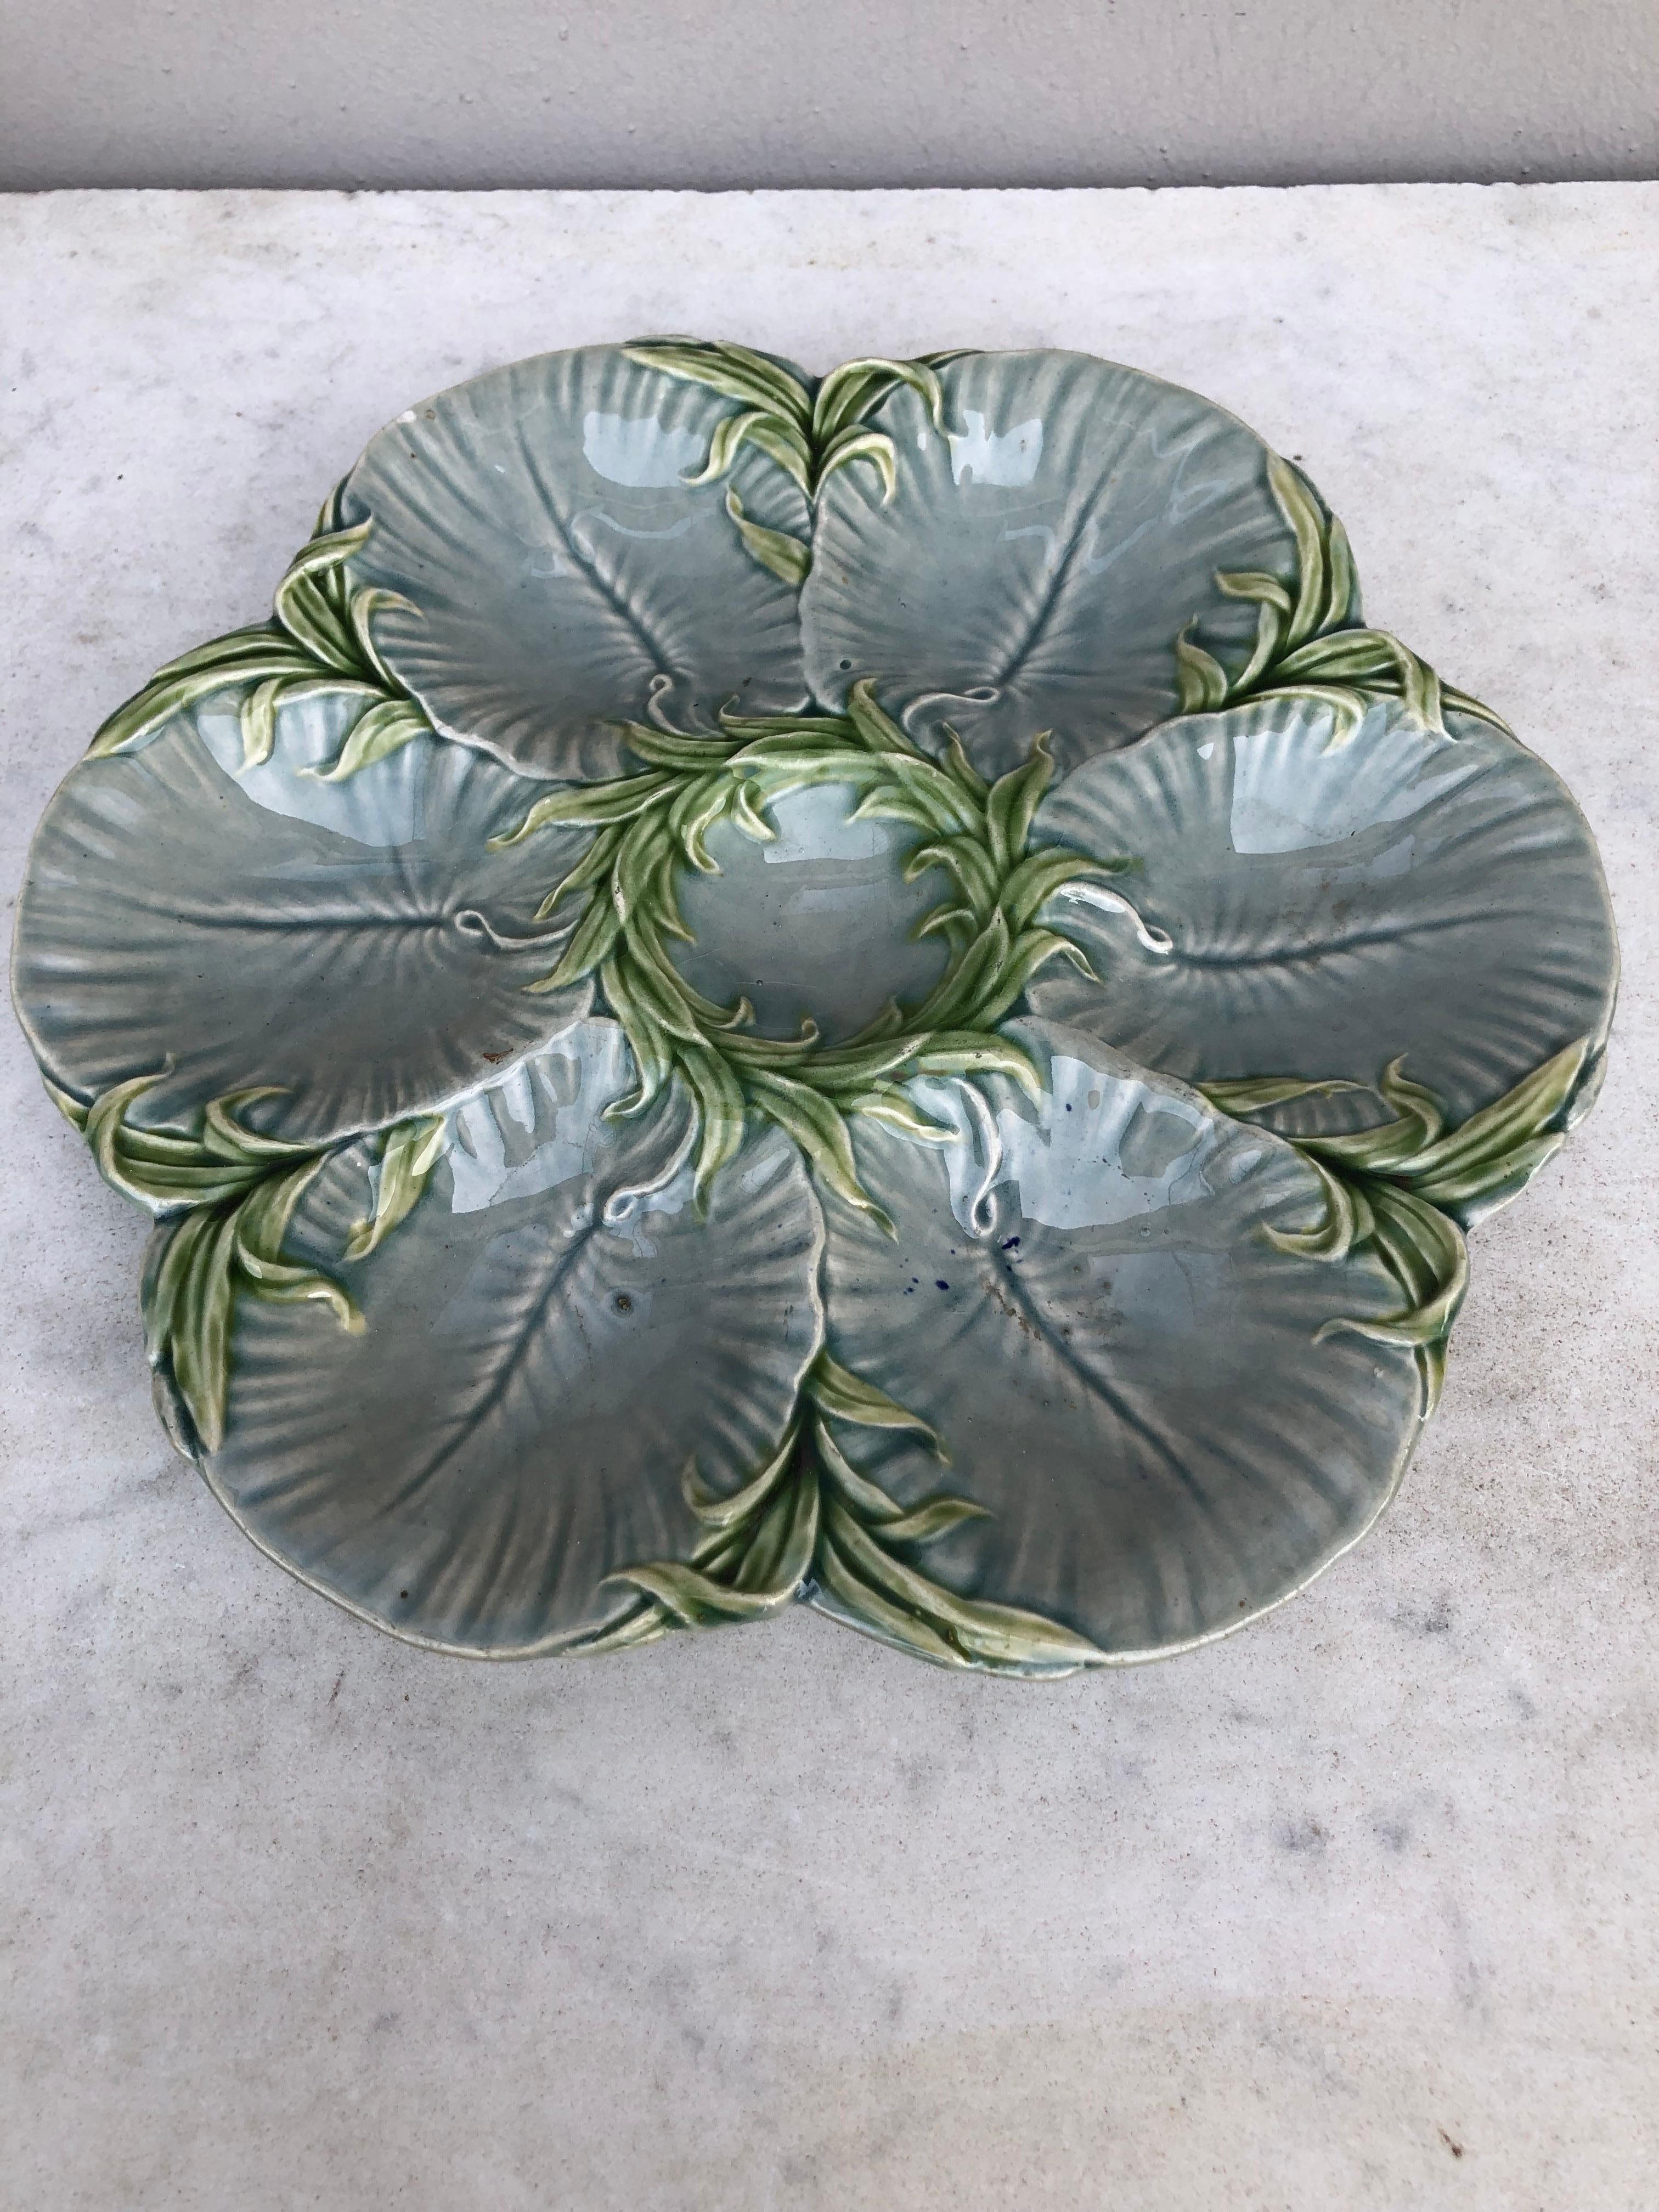 Rare 19th century Majolica gray oyster plate with green seaweeds Luneville.
Reference: Page 43 